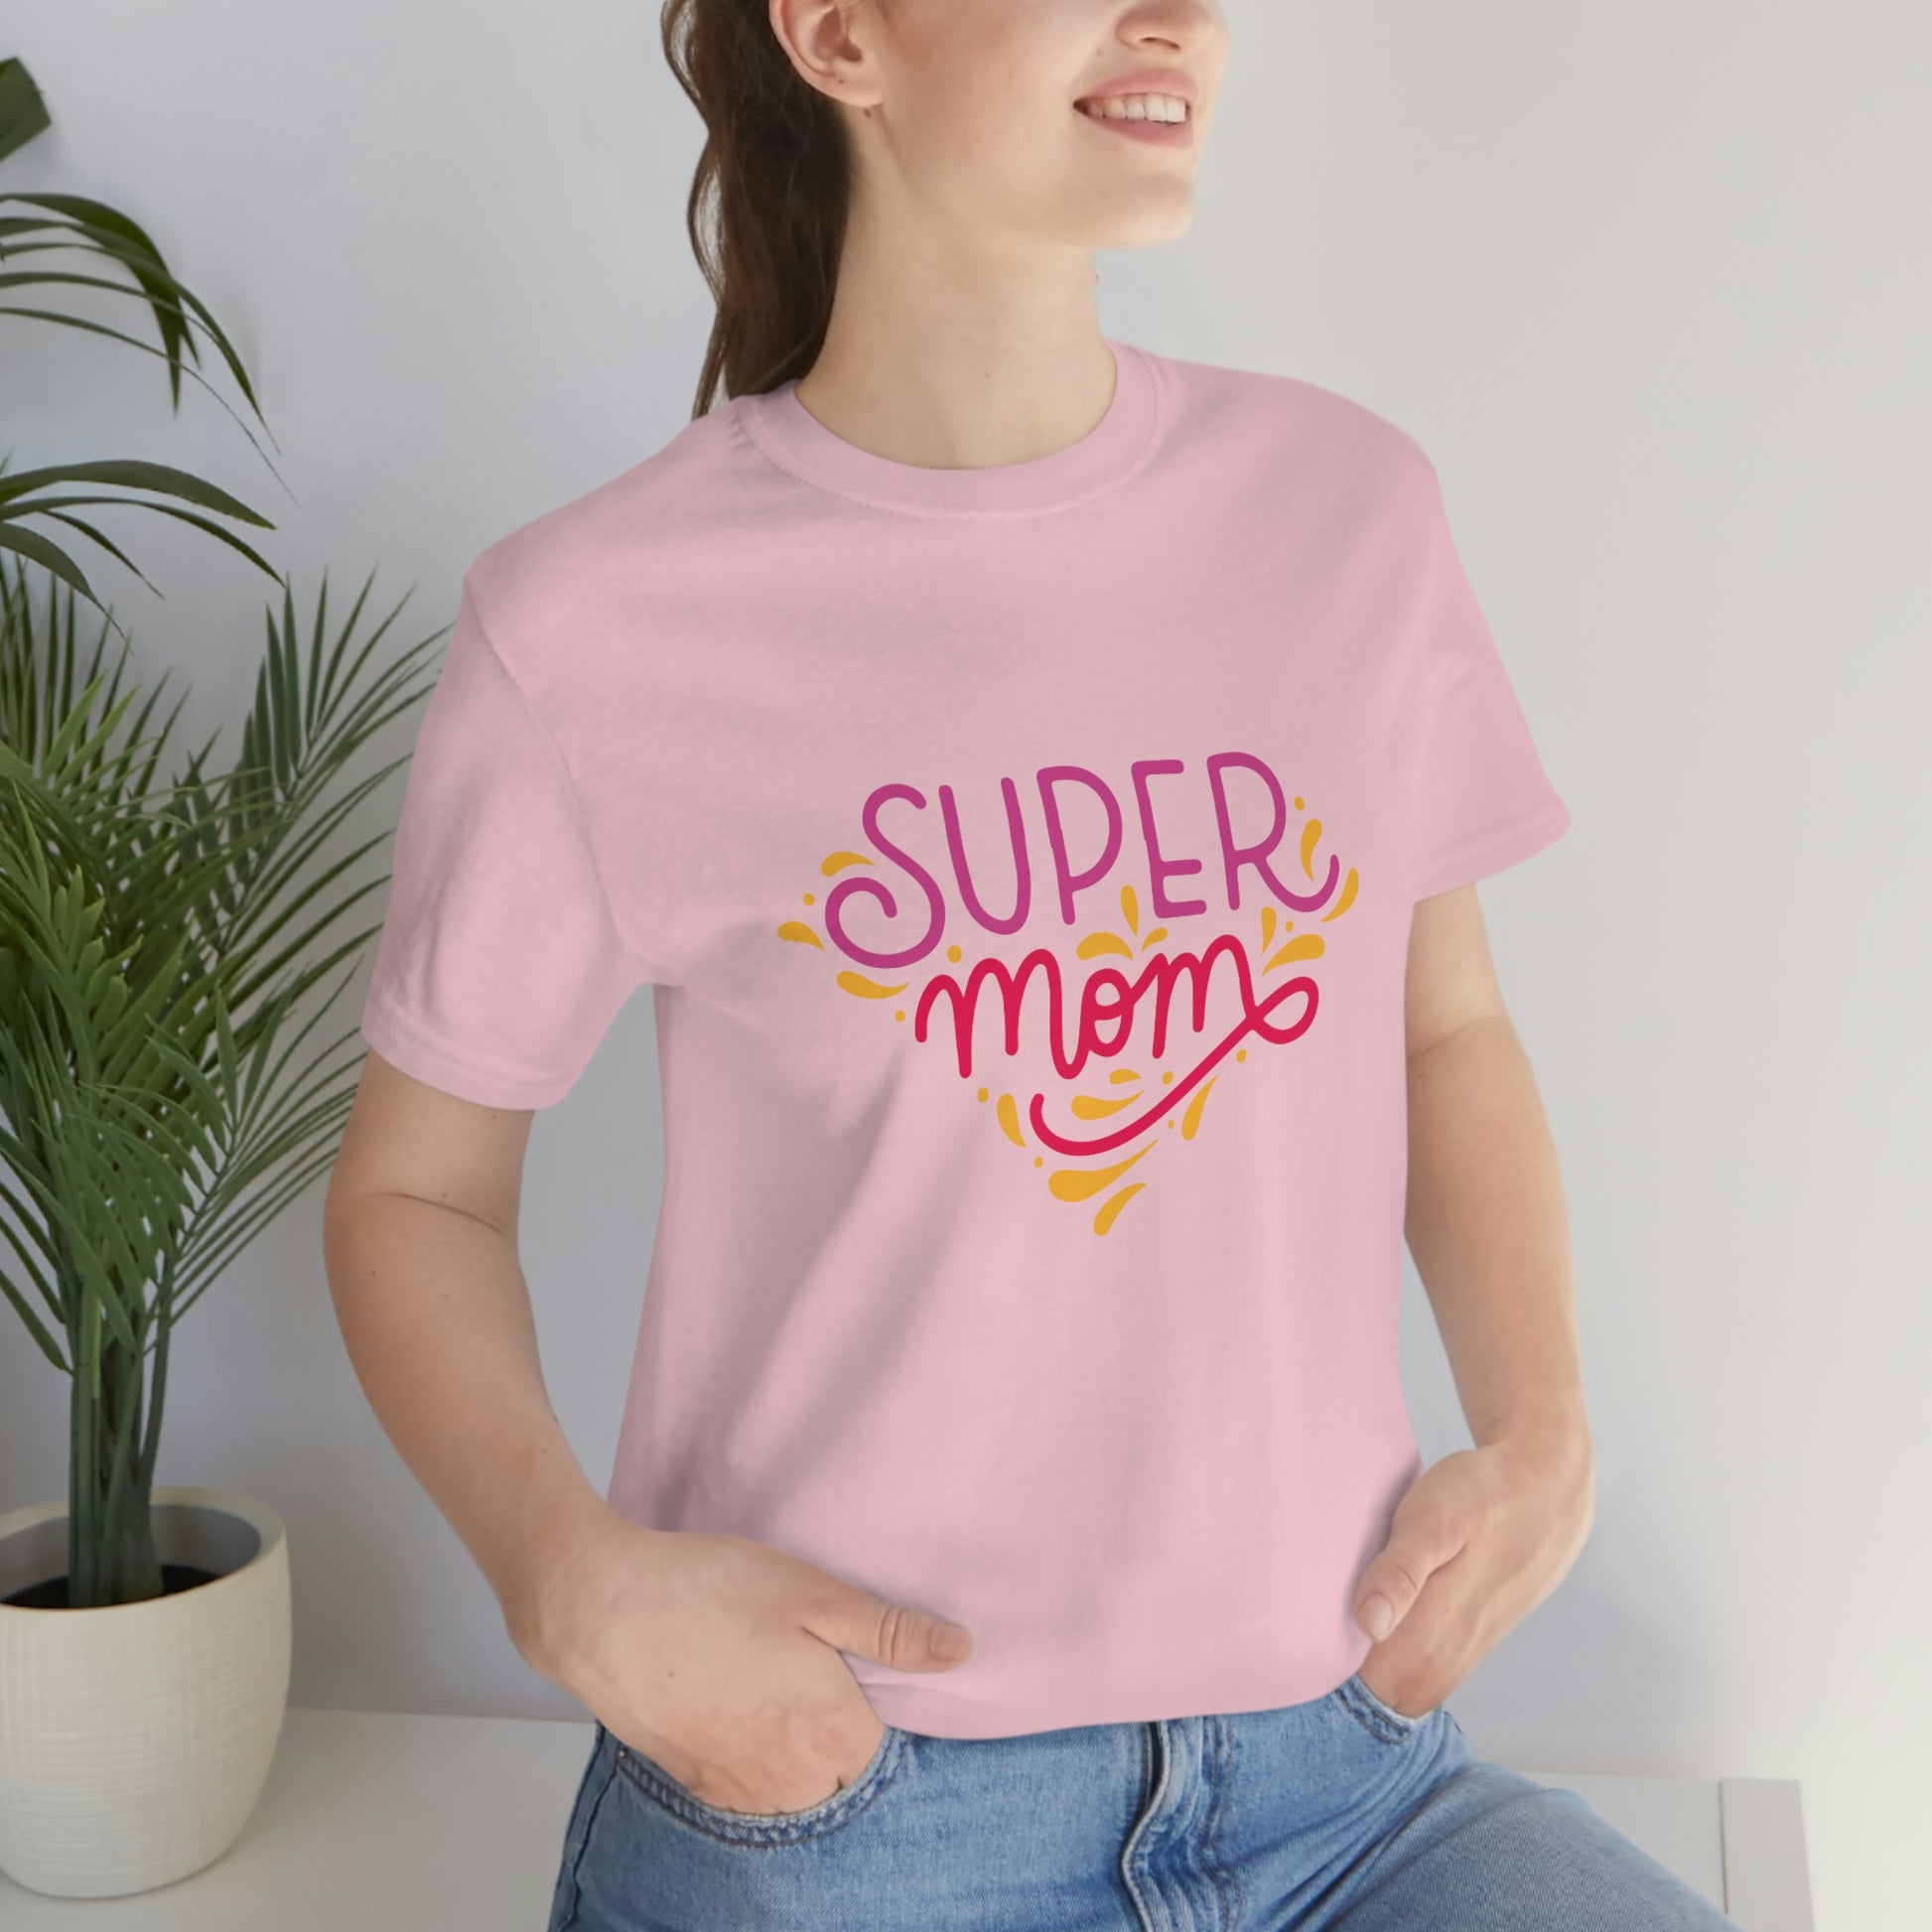 Super lovable design for the perfect Mothersday gift. Super mom pink T-shirt is carefully crafted with high-quality materials, is both comfortable and durable, making it a versatile addition to any mom's wardrobe.